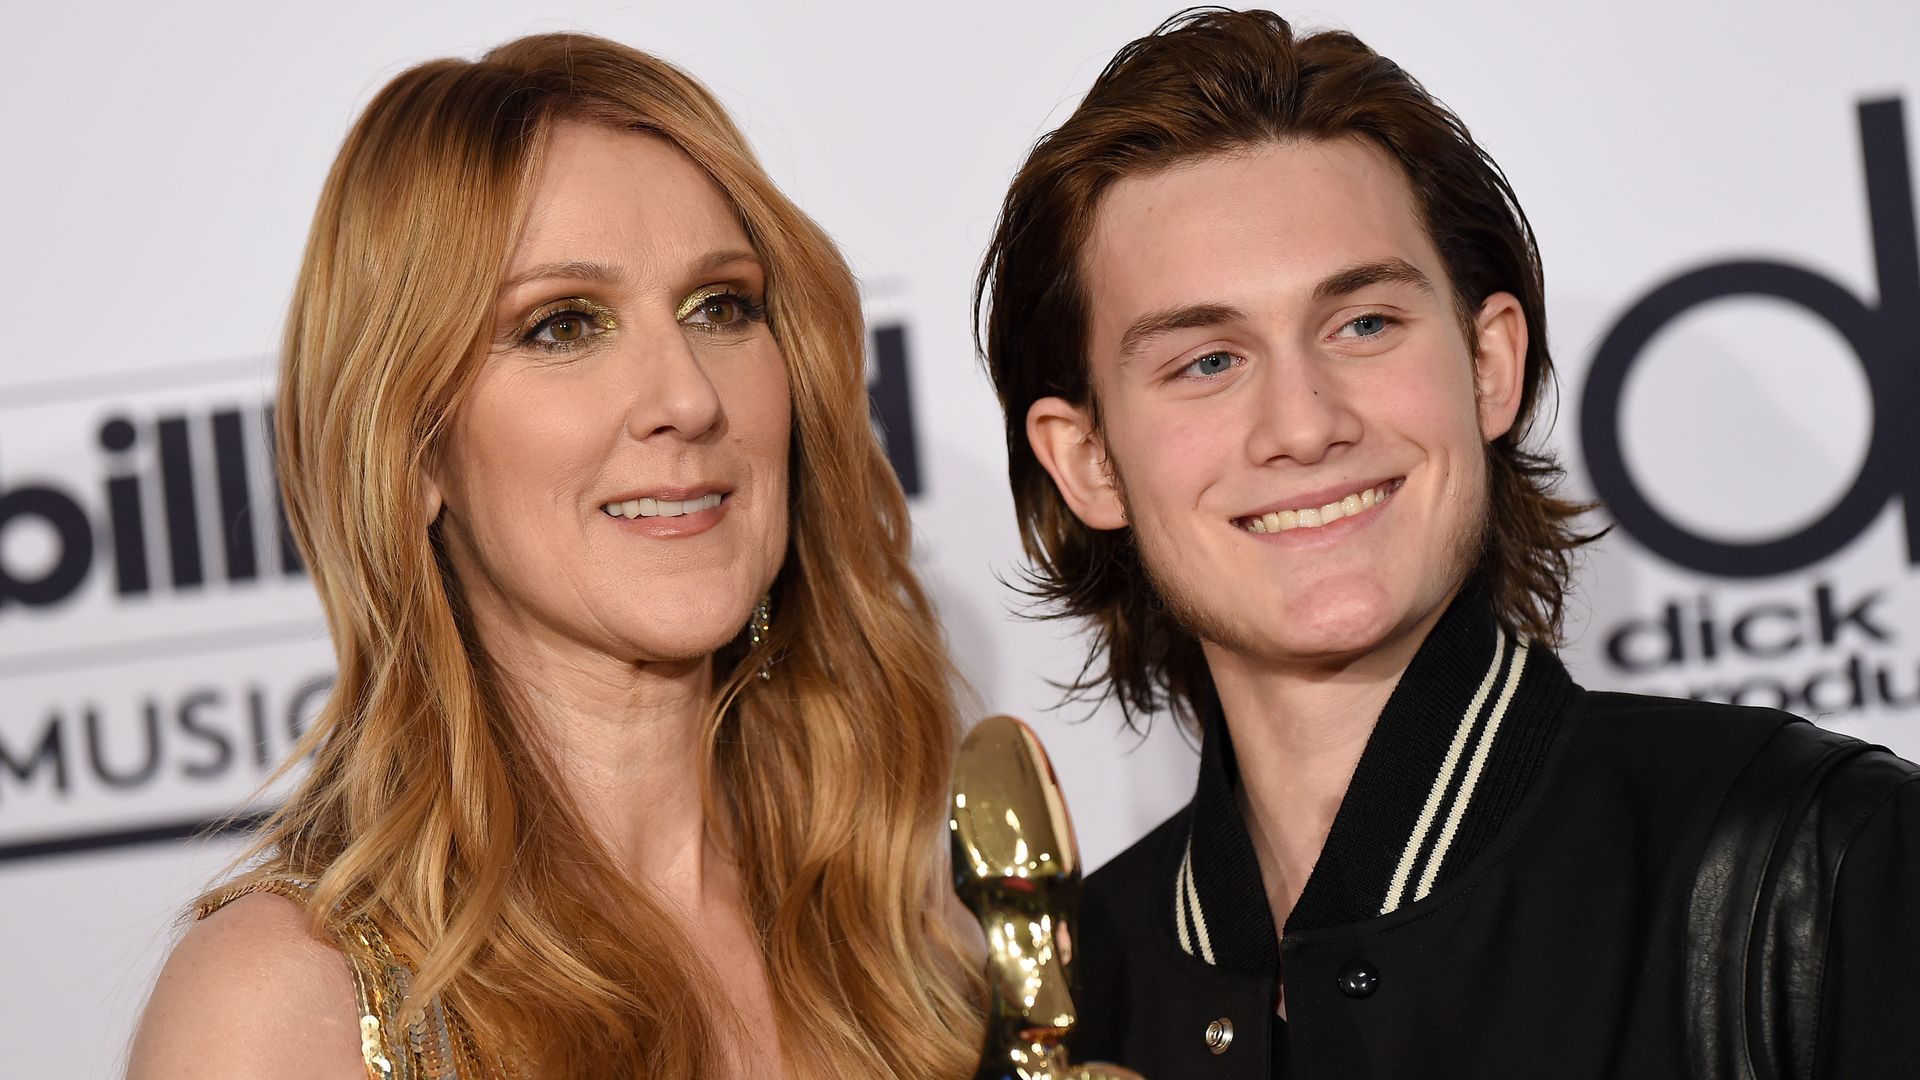 Celine Dion standing with her son